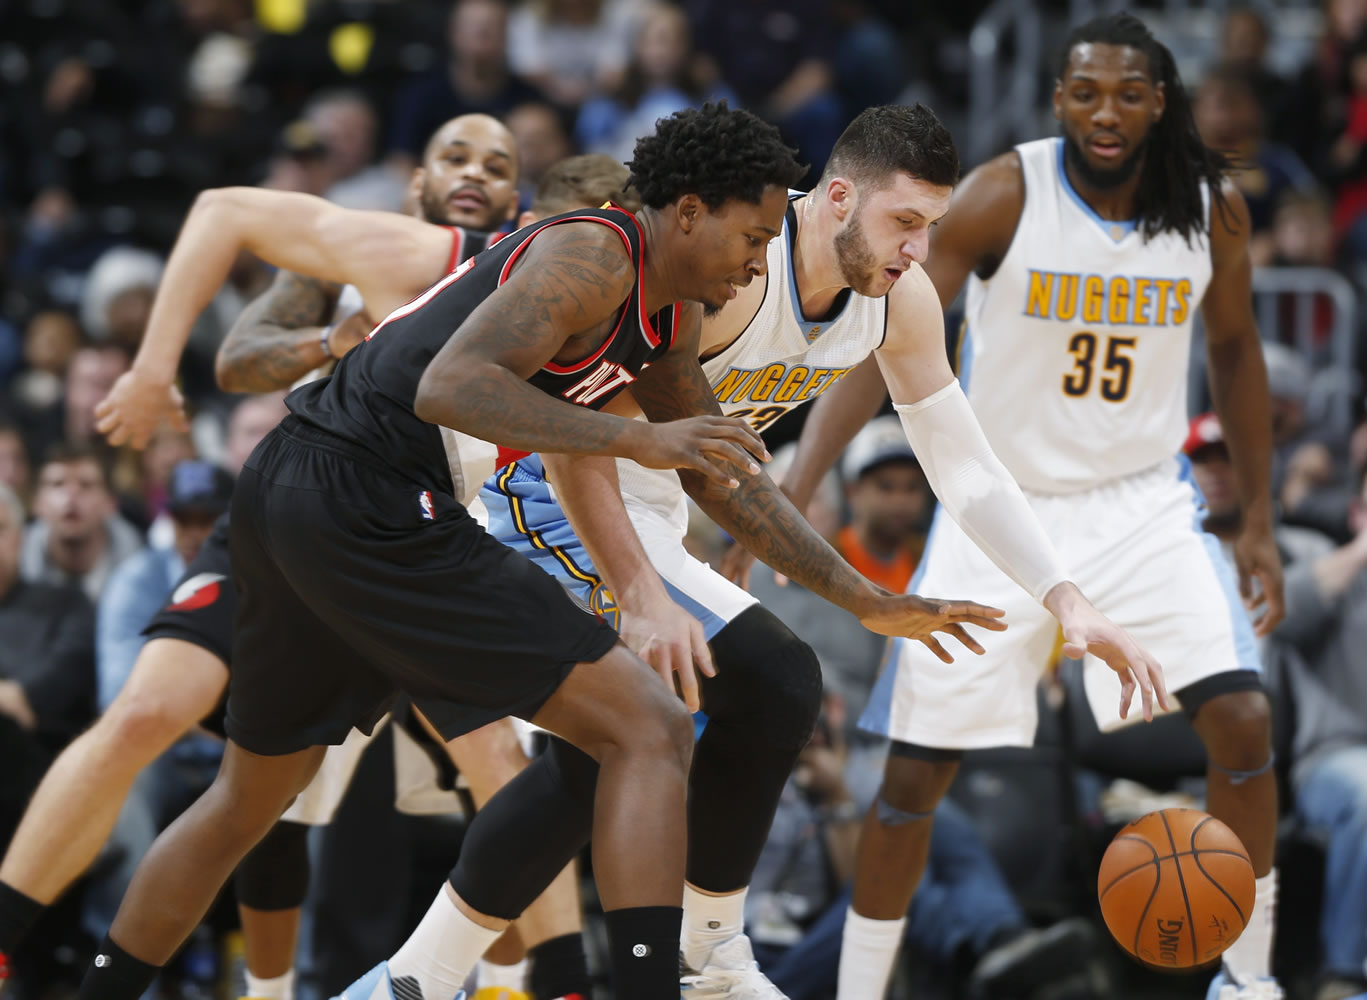 Portland Trail Blazers center Ed Davis, front, pursues the ball with Denver Nuggets center Jusuf Nurkic, center and forward Kenneth Faried in second half of an NBA basketball game Sunday, Jan. 3, 2016, in Denver. Portland won 112-106.